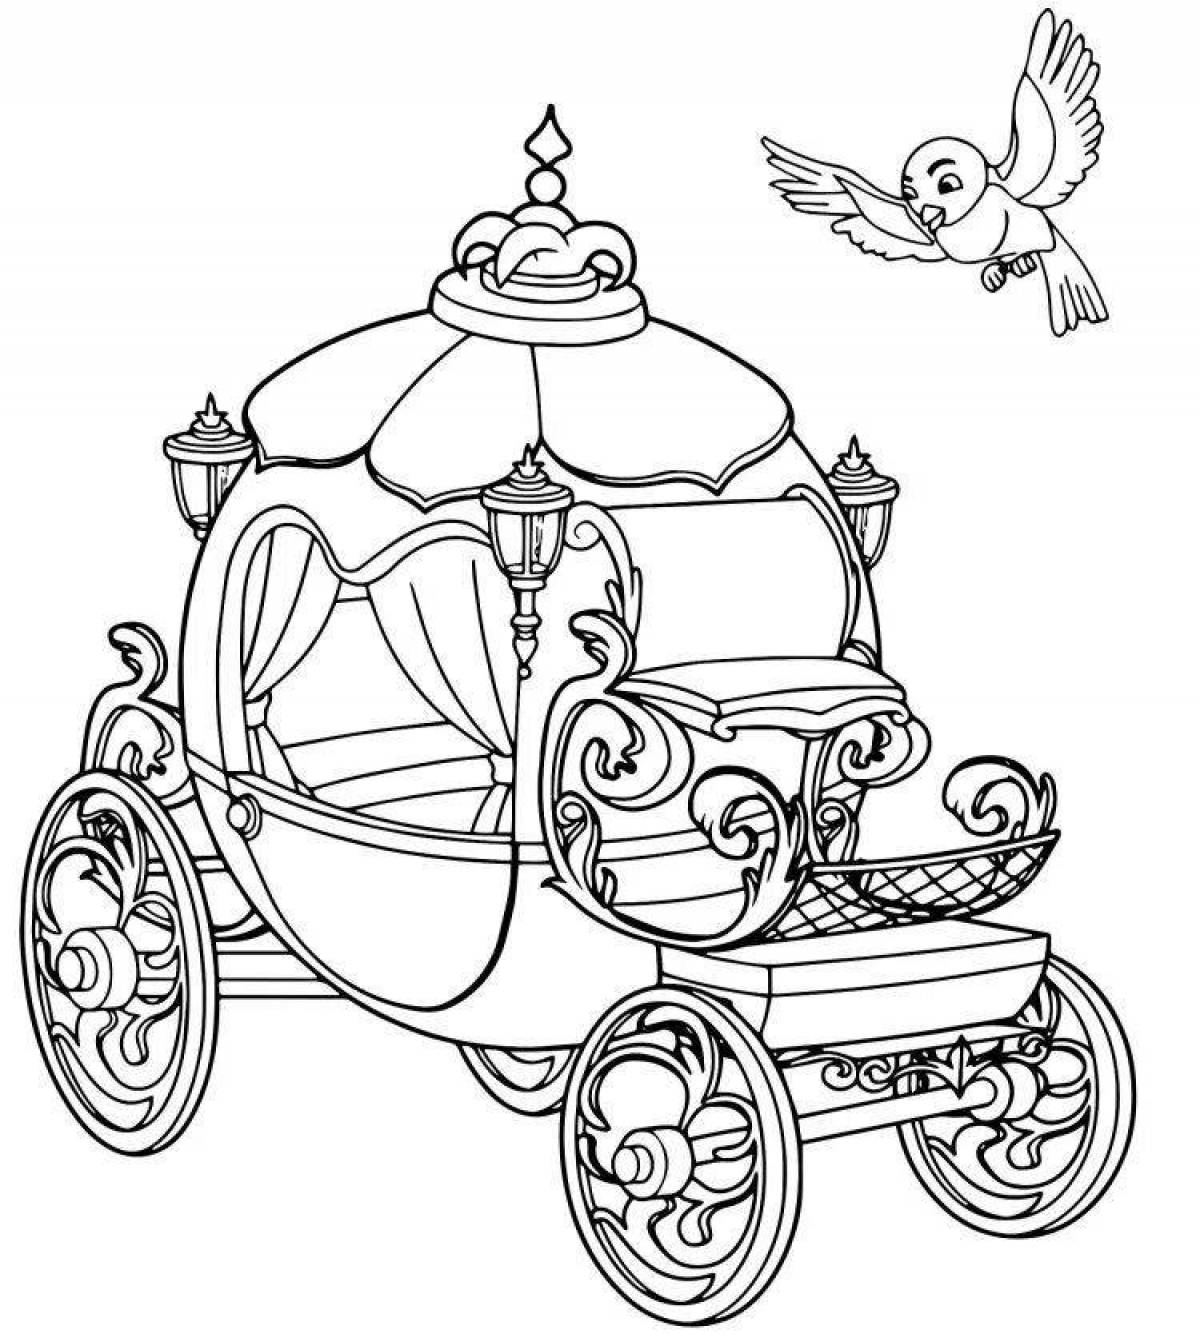 Cinderella's majestic carriage coloring page